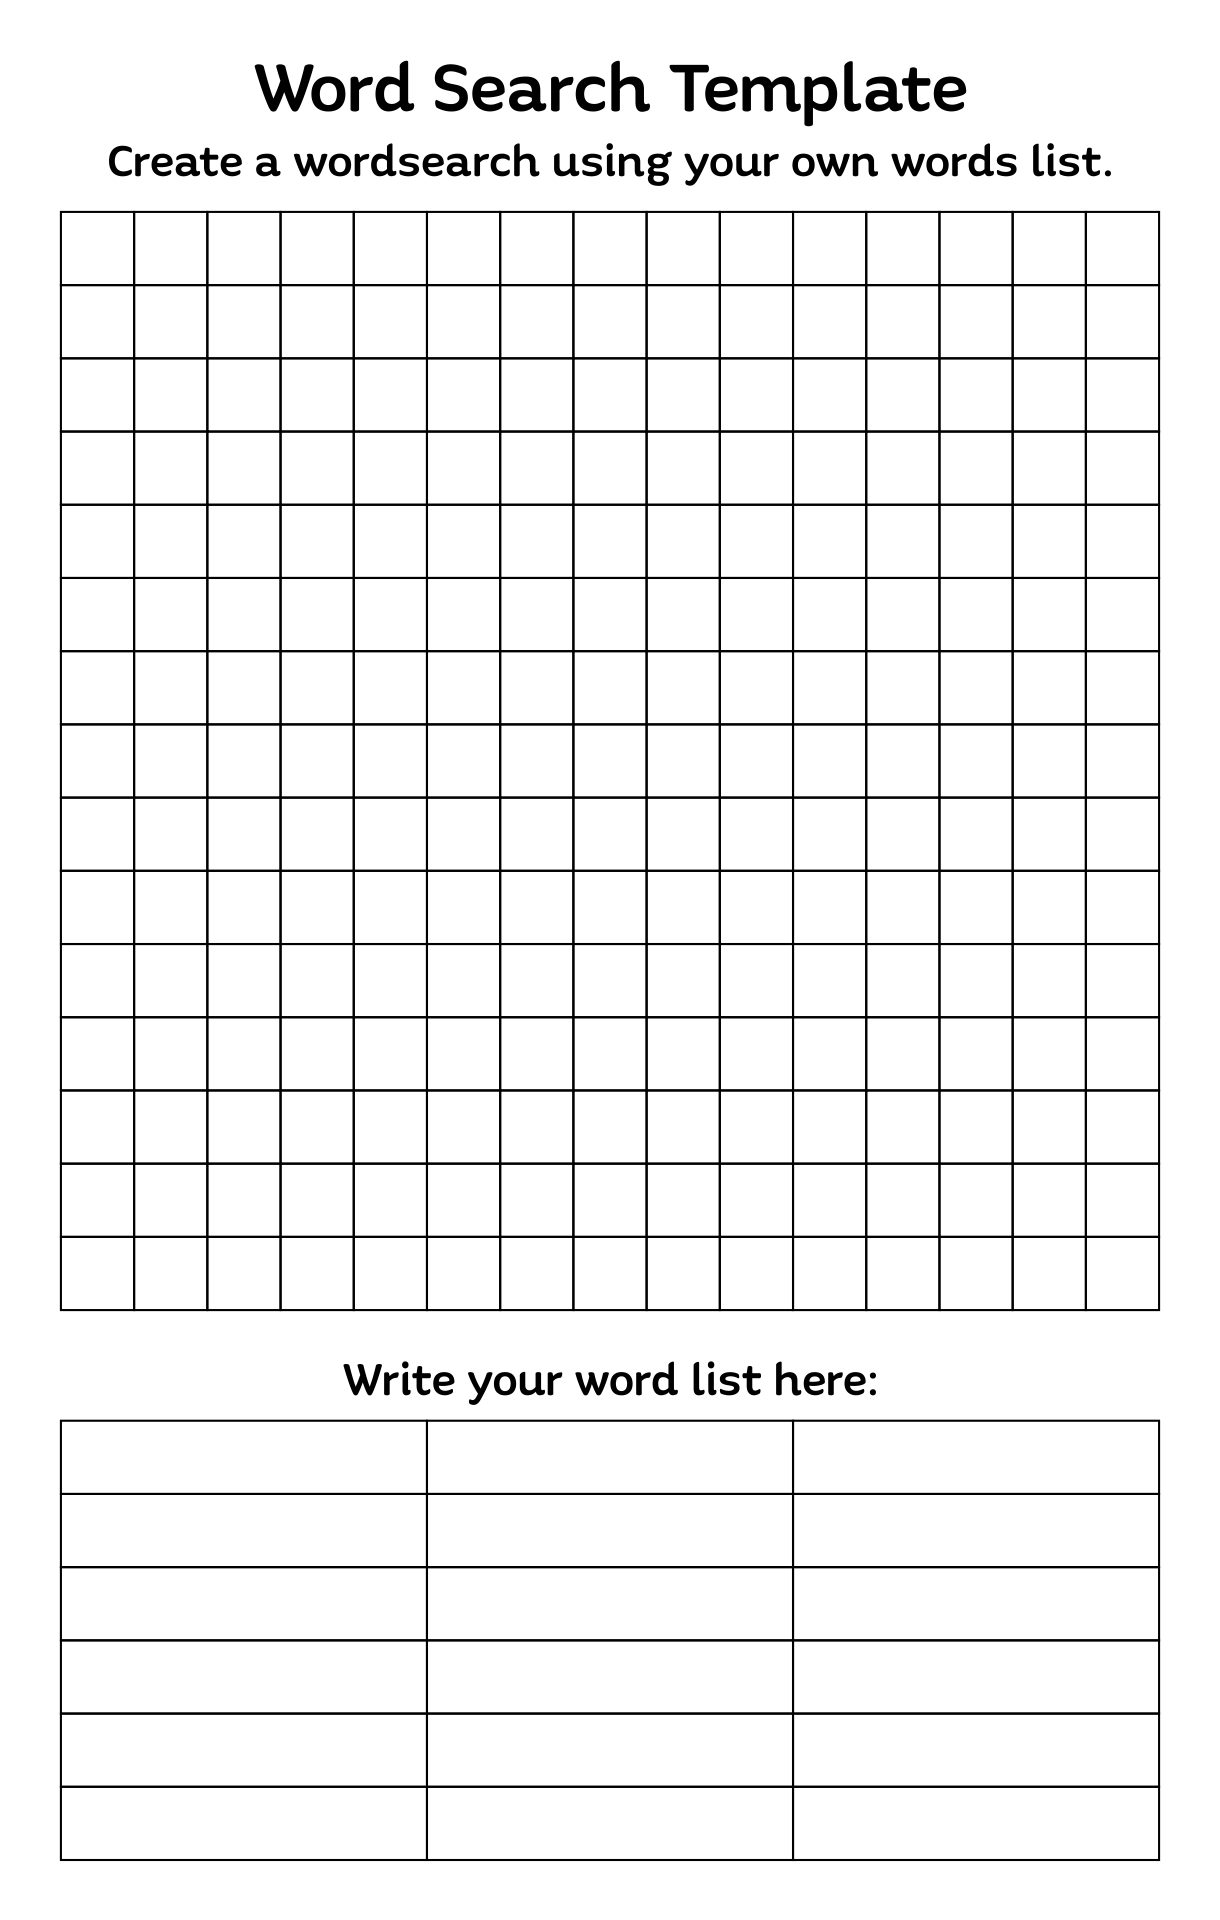 Teacherfieracom Word Search Templates Coloured And Black And White 